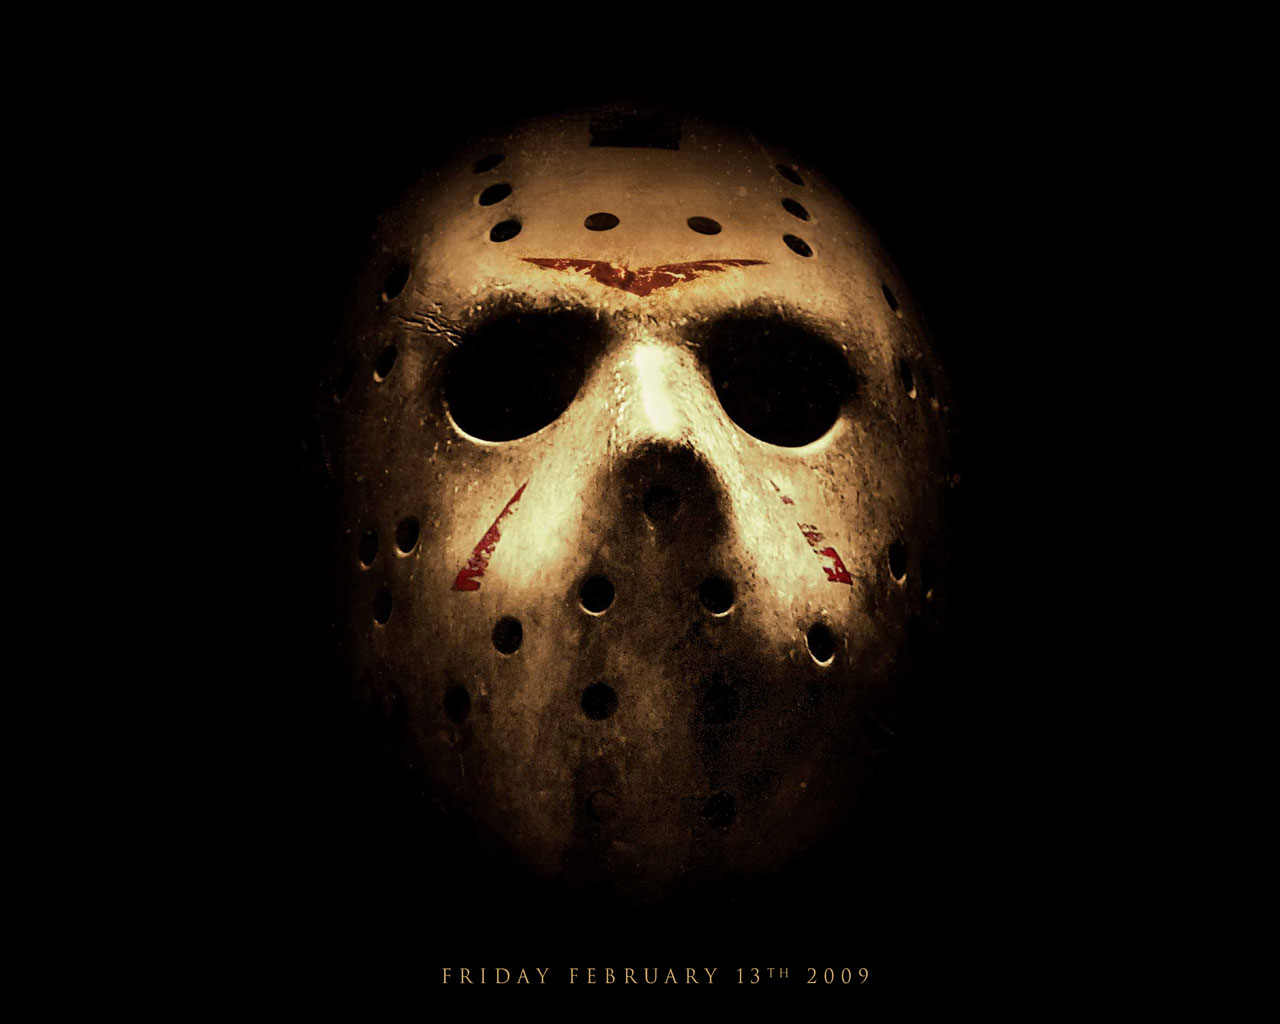 Download full size Friday The 13th wallpaper / Movies / 1280x1024